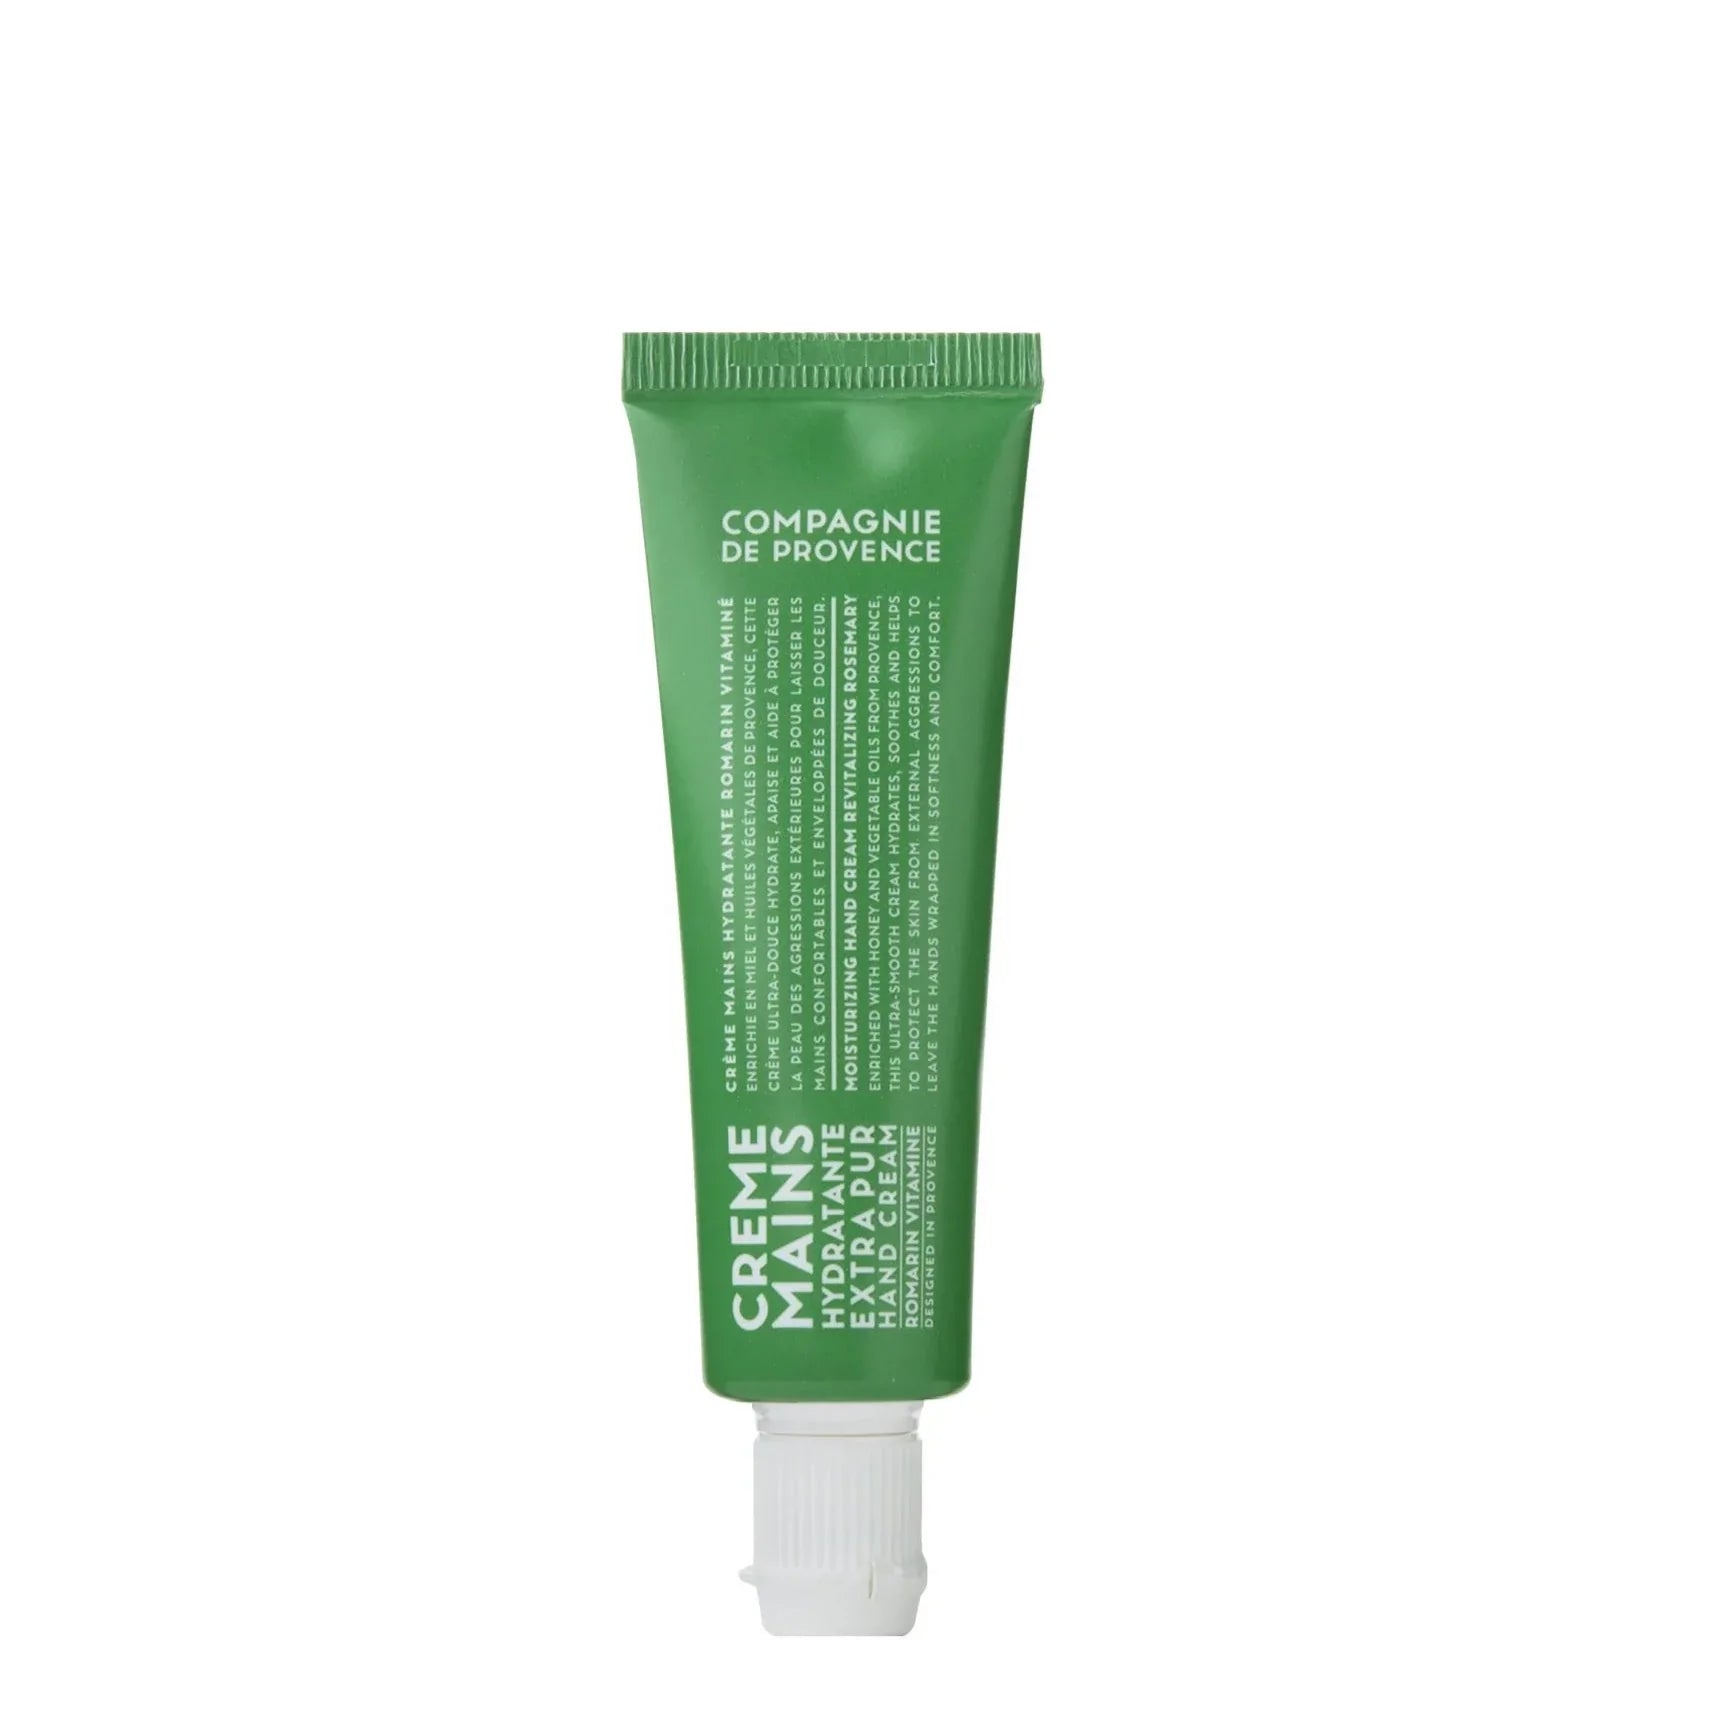 Green lotion tube with white cap. Has white text on the front of it